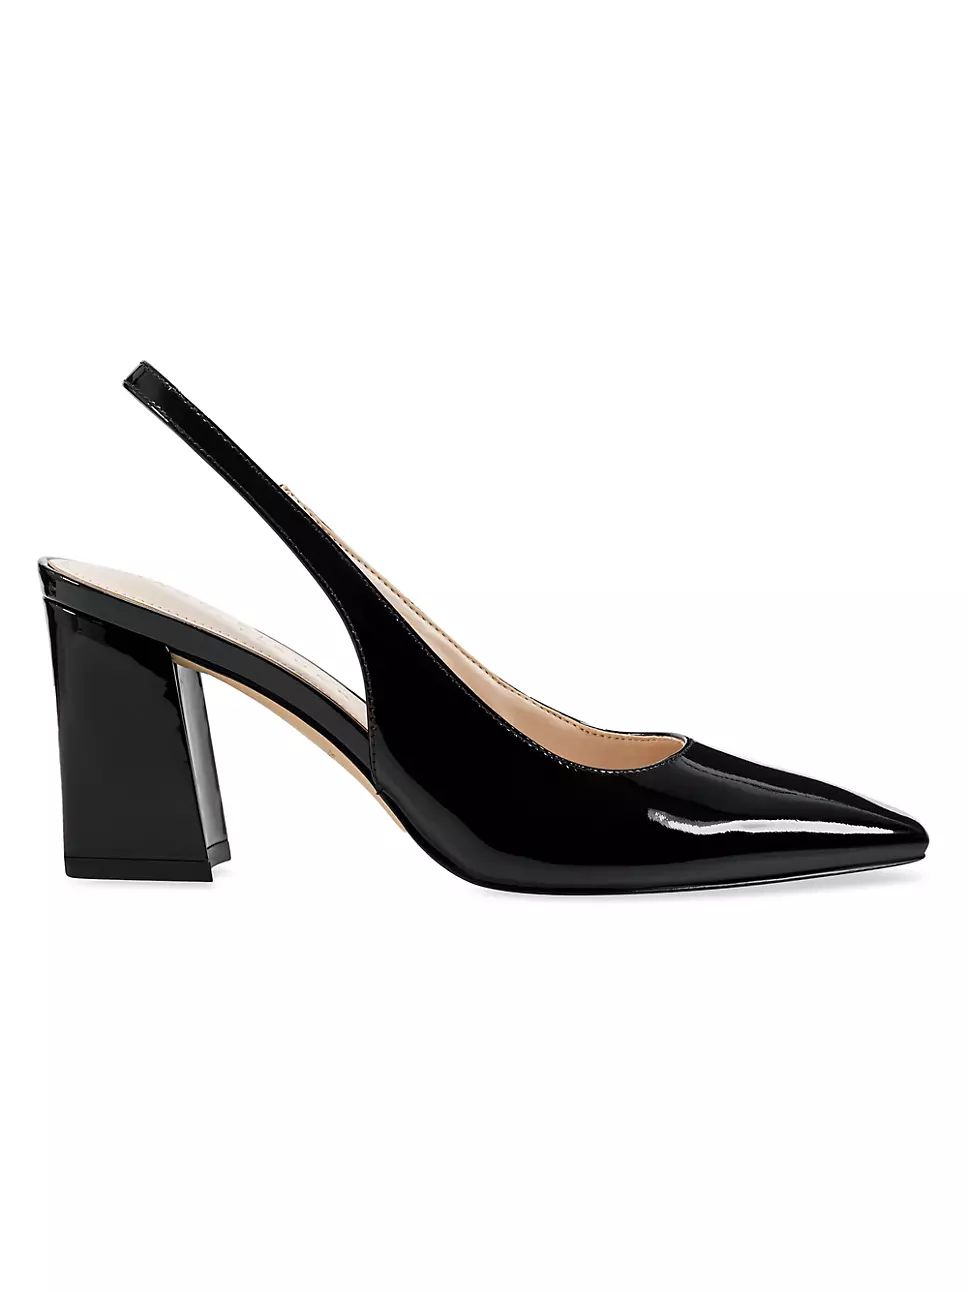 65MM Patent Leather Slingback Pumps | Saks Fifth Avenue